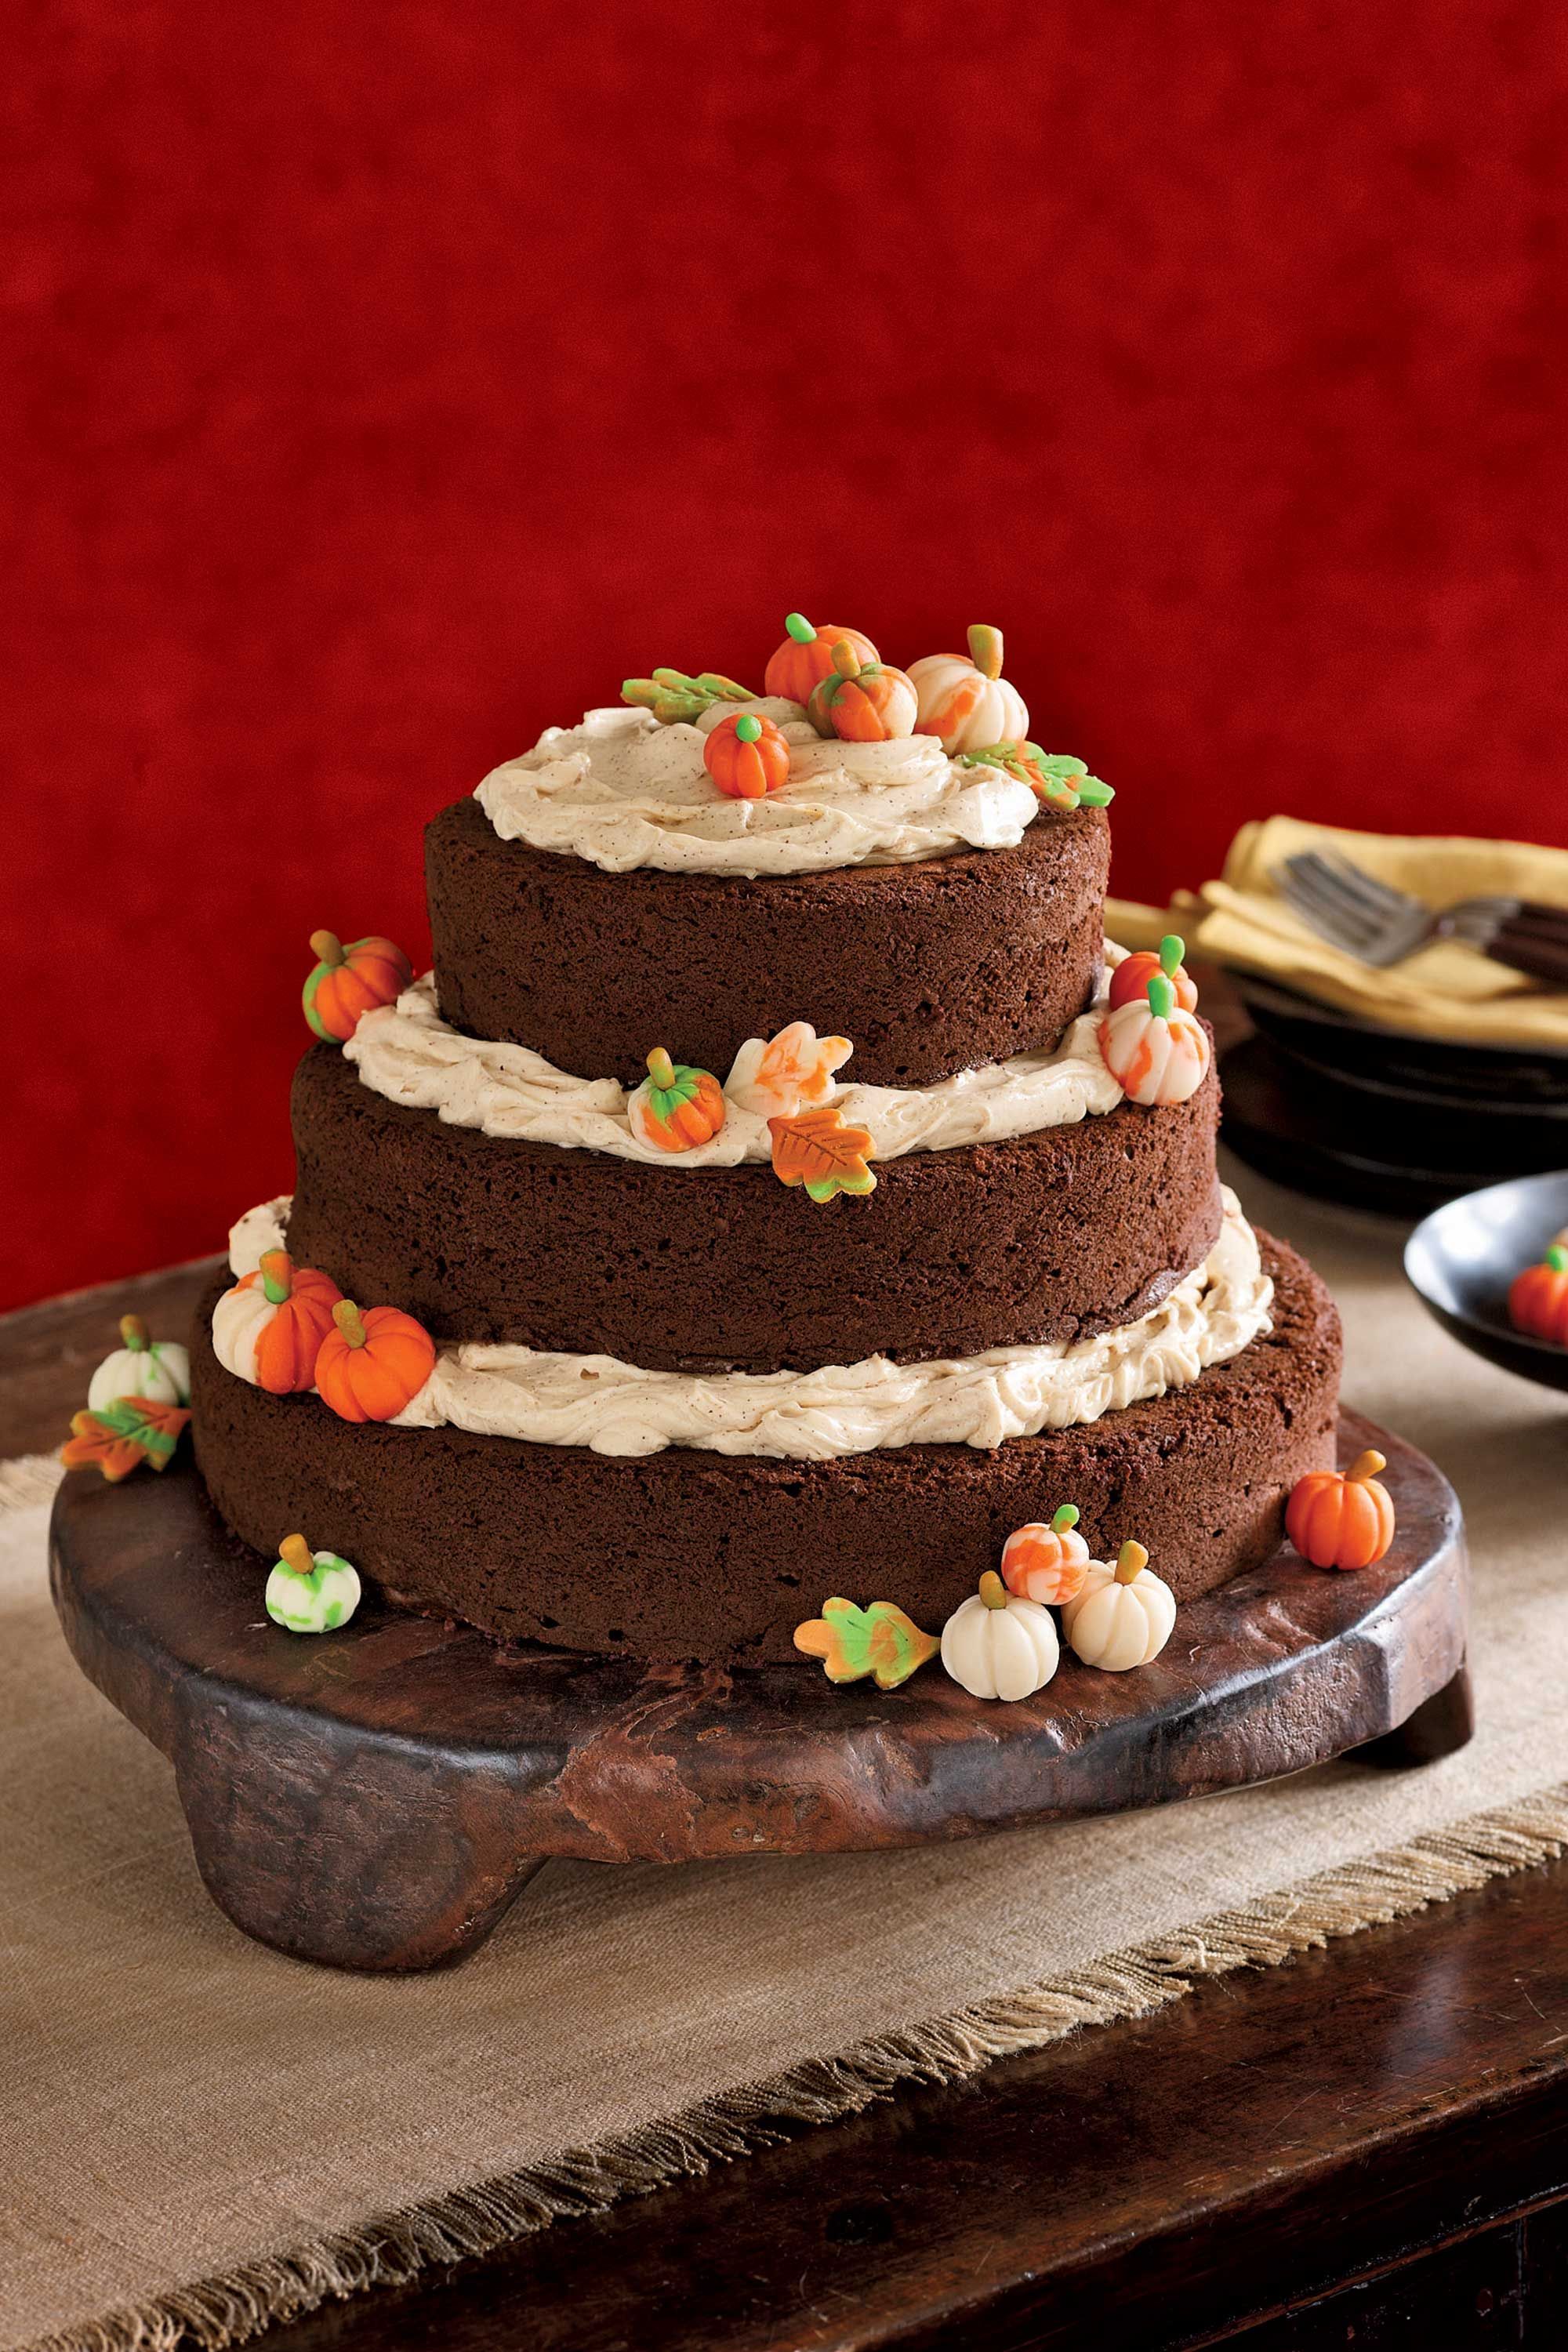 Halloween Cakes That Are Spooky and Deliciously Fun - Woman's World